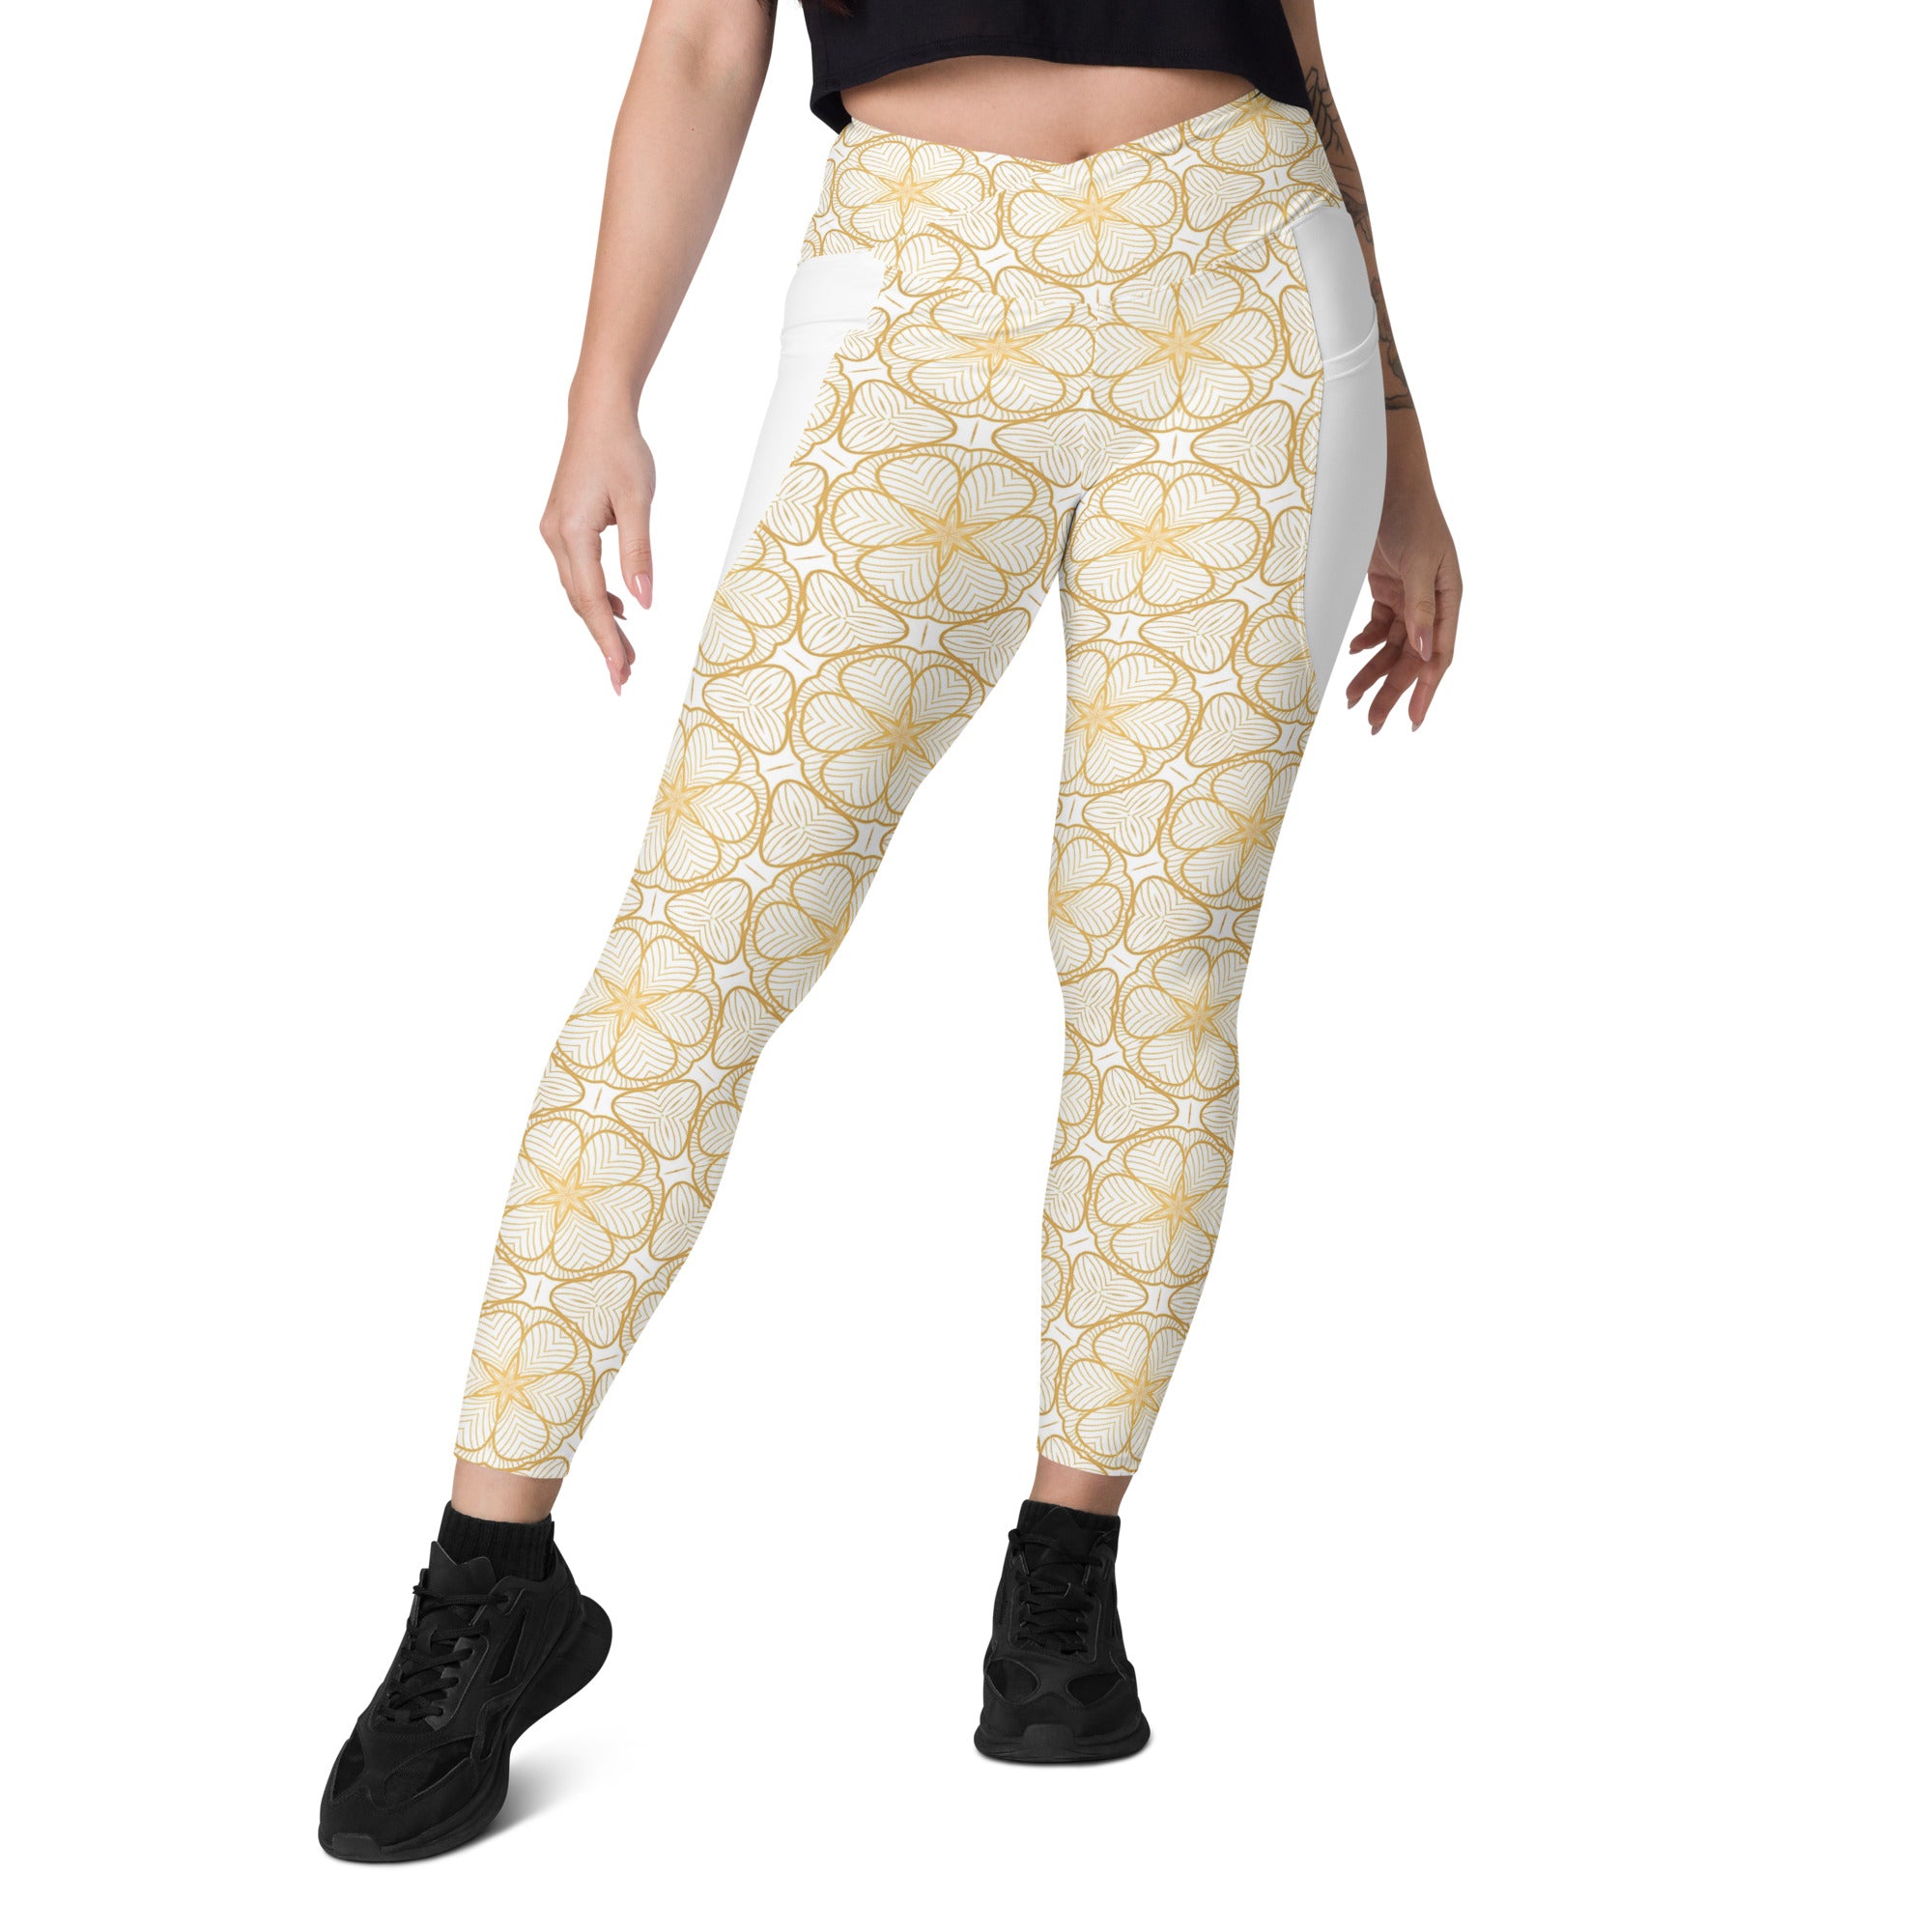 Floral Fusion Leggings with side pockets in crossover design.